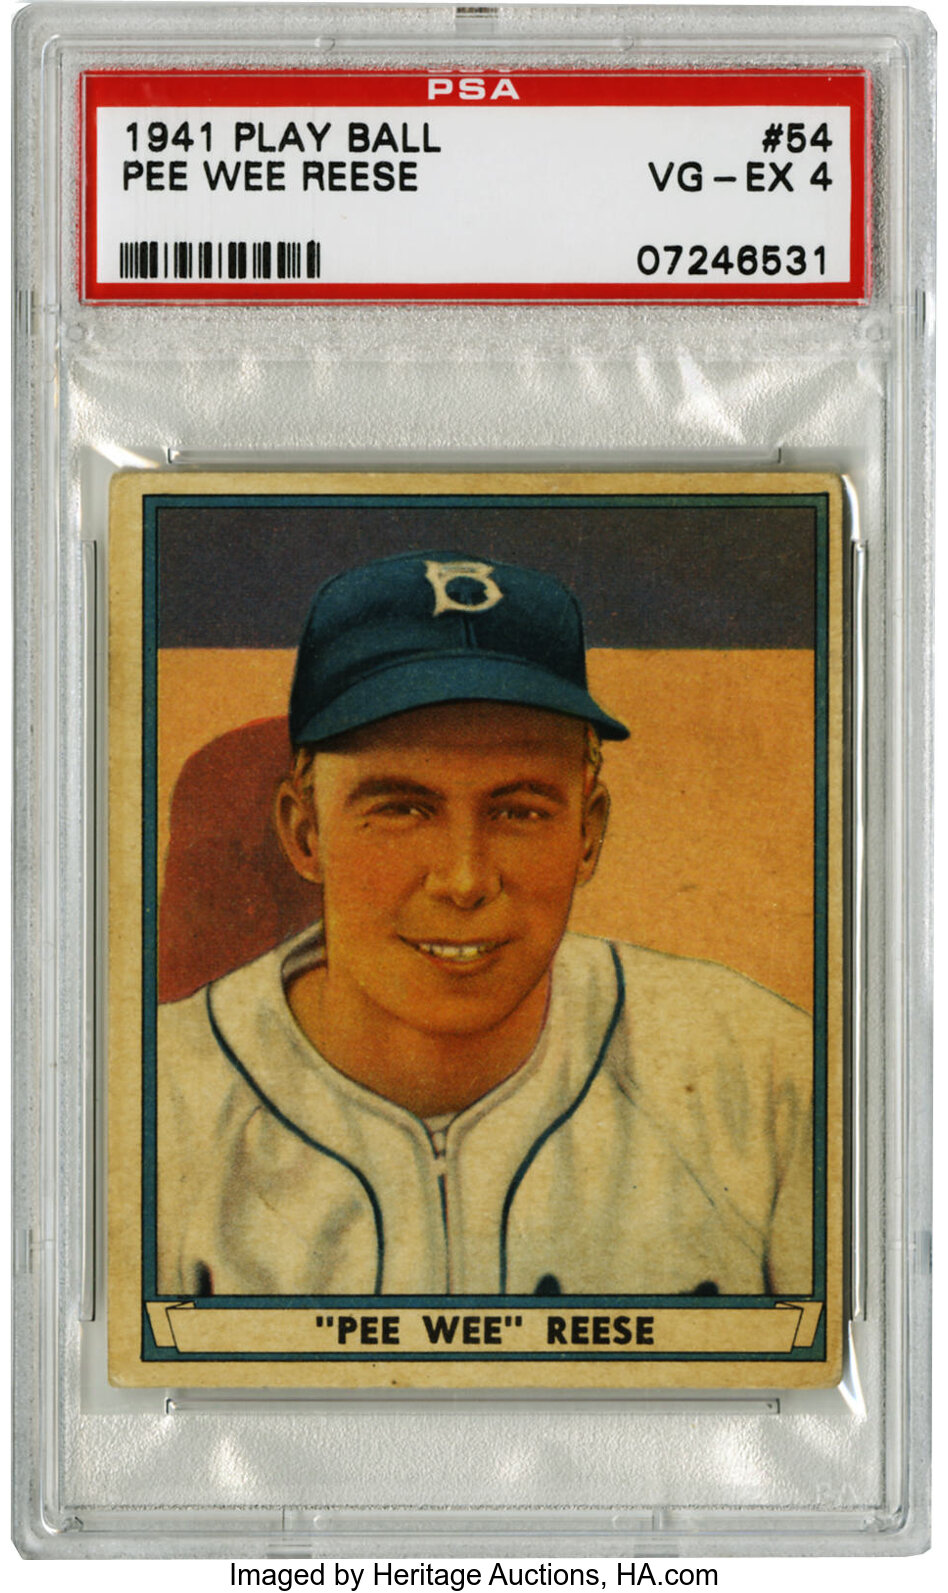 June 1, 1940: Pee Wee Reese gets beaned by Cubs, leading to